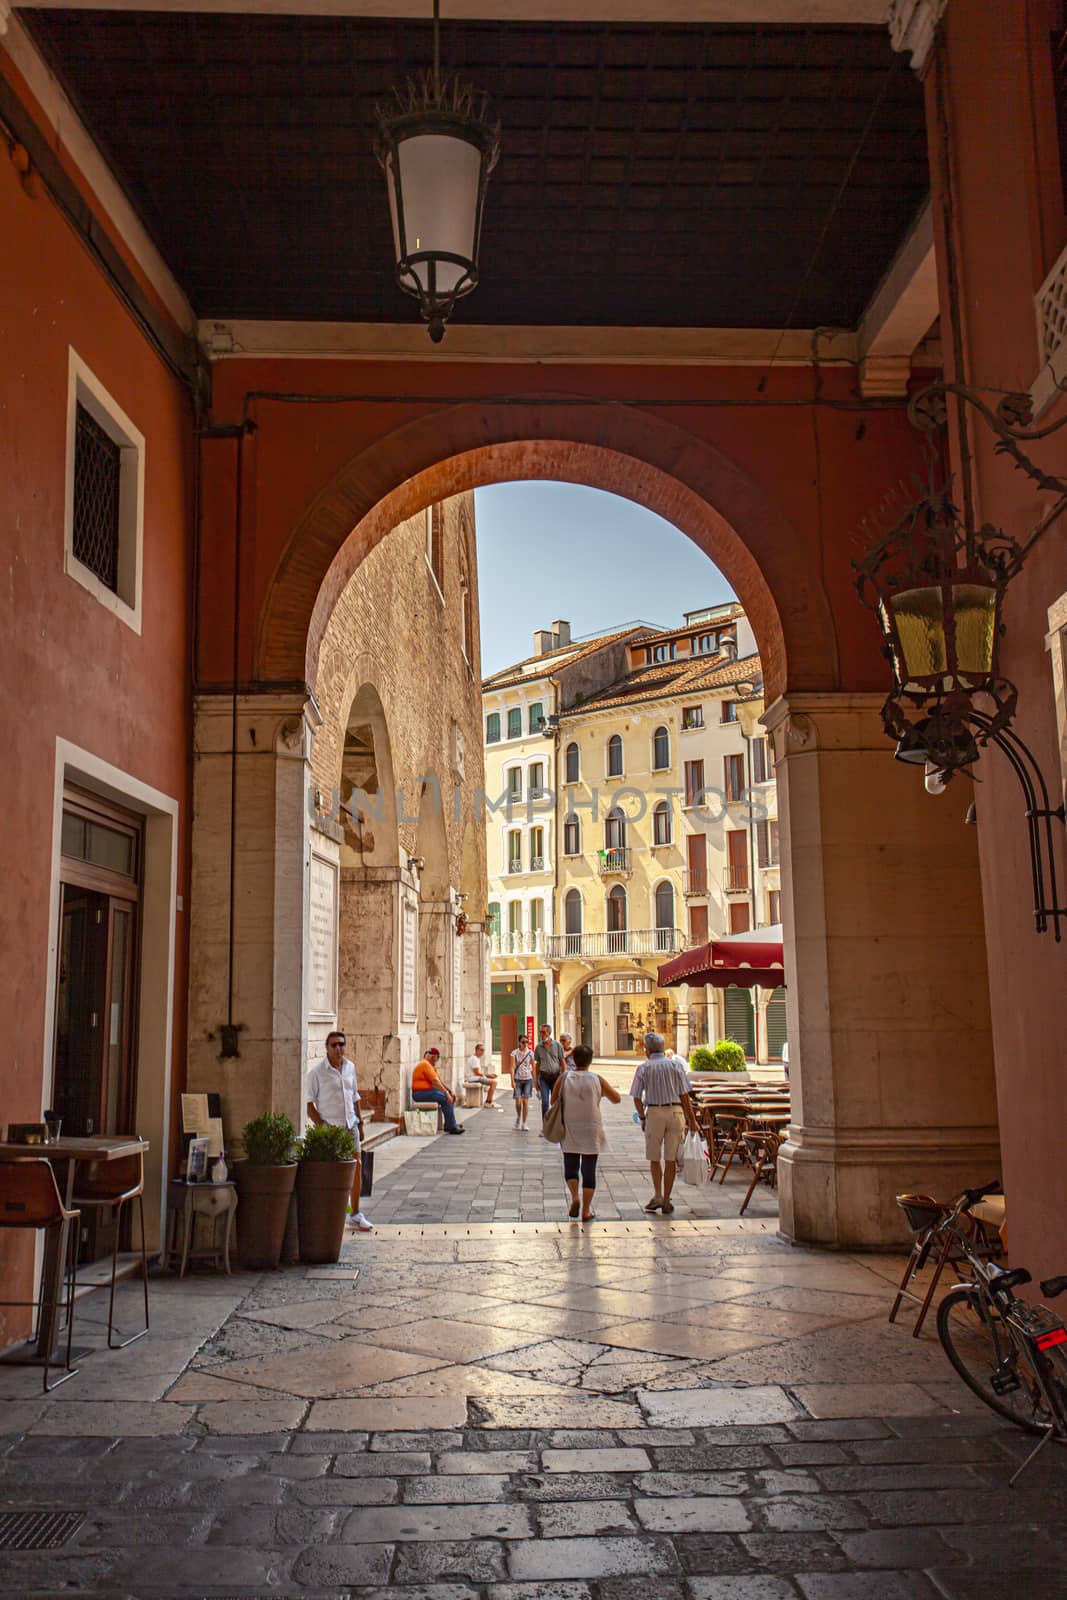 TREVISO, ITALY 13 AUGUST 2020: Arcades in Piazza dei signori in Treviso with people passing through